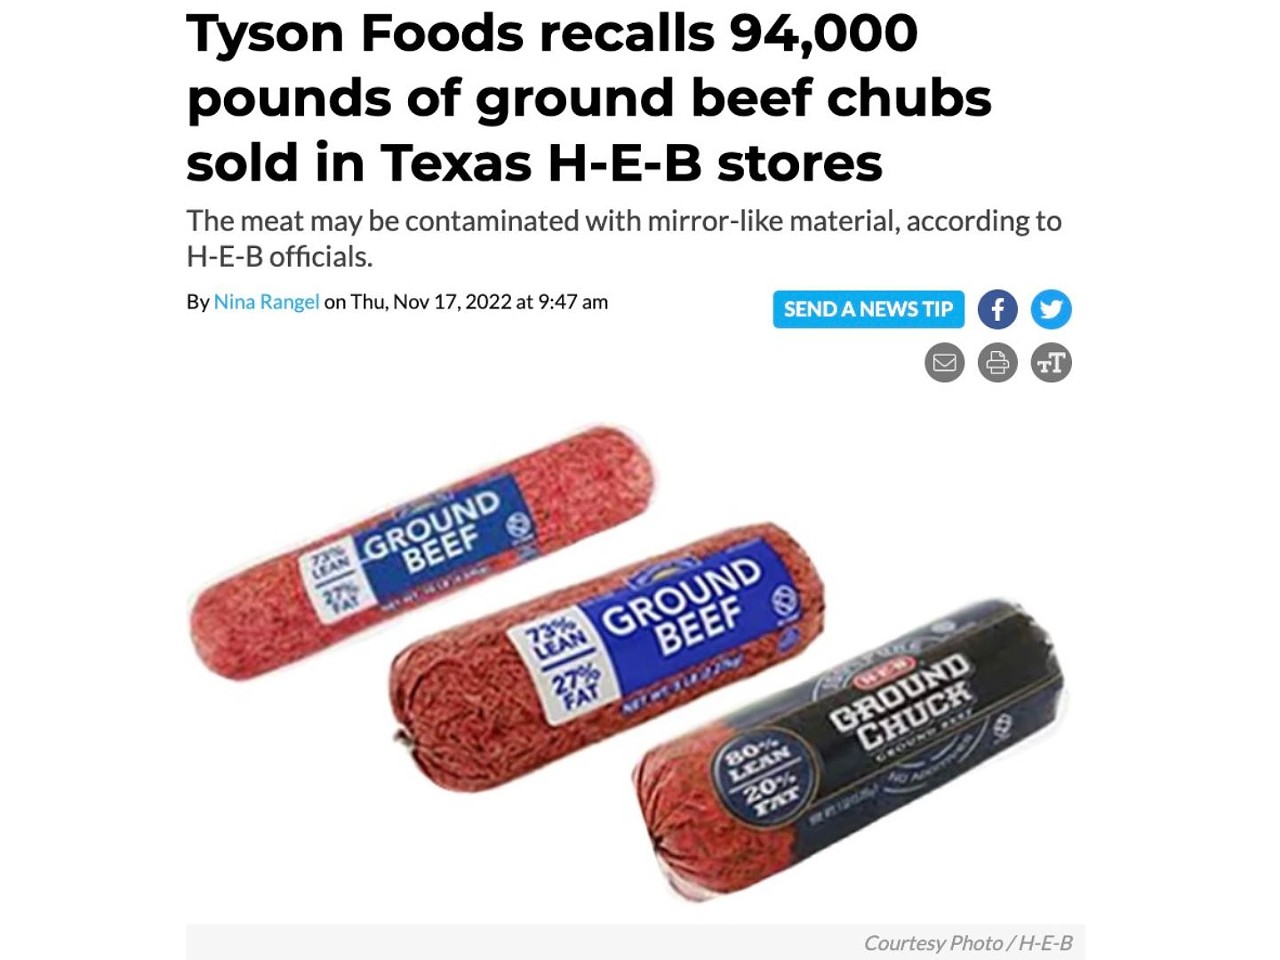 18. Tyson Foods recalls 94,000 pounds of ground beef chubs sold in Texas H-E-B stores